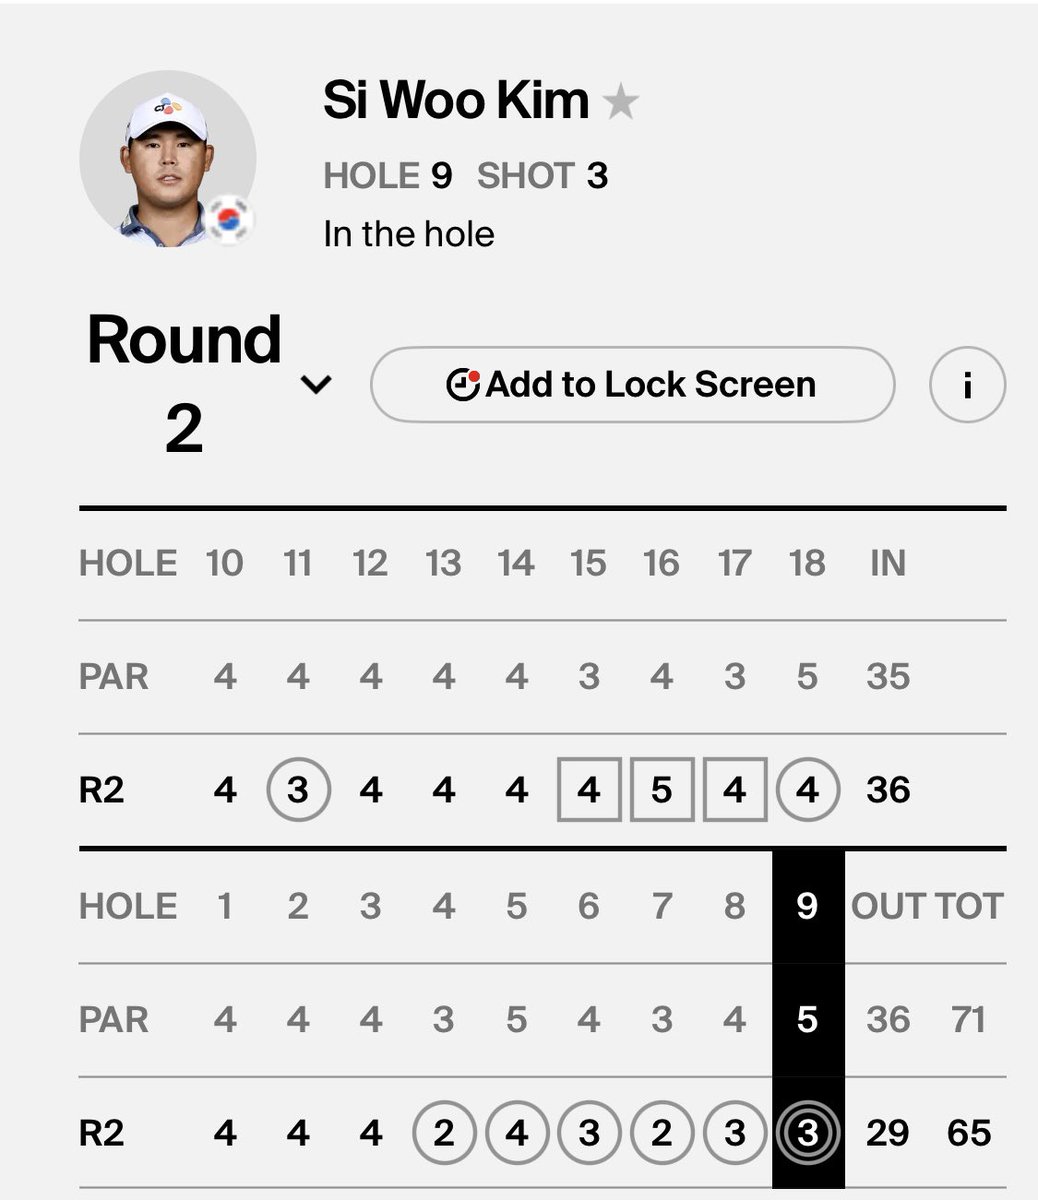 That finish from Si Woo today! My word.